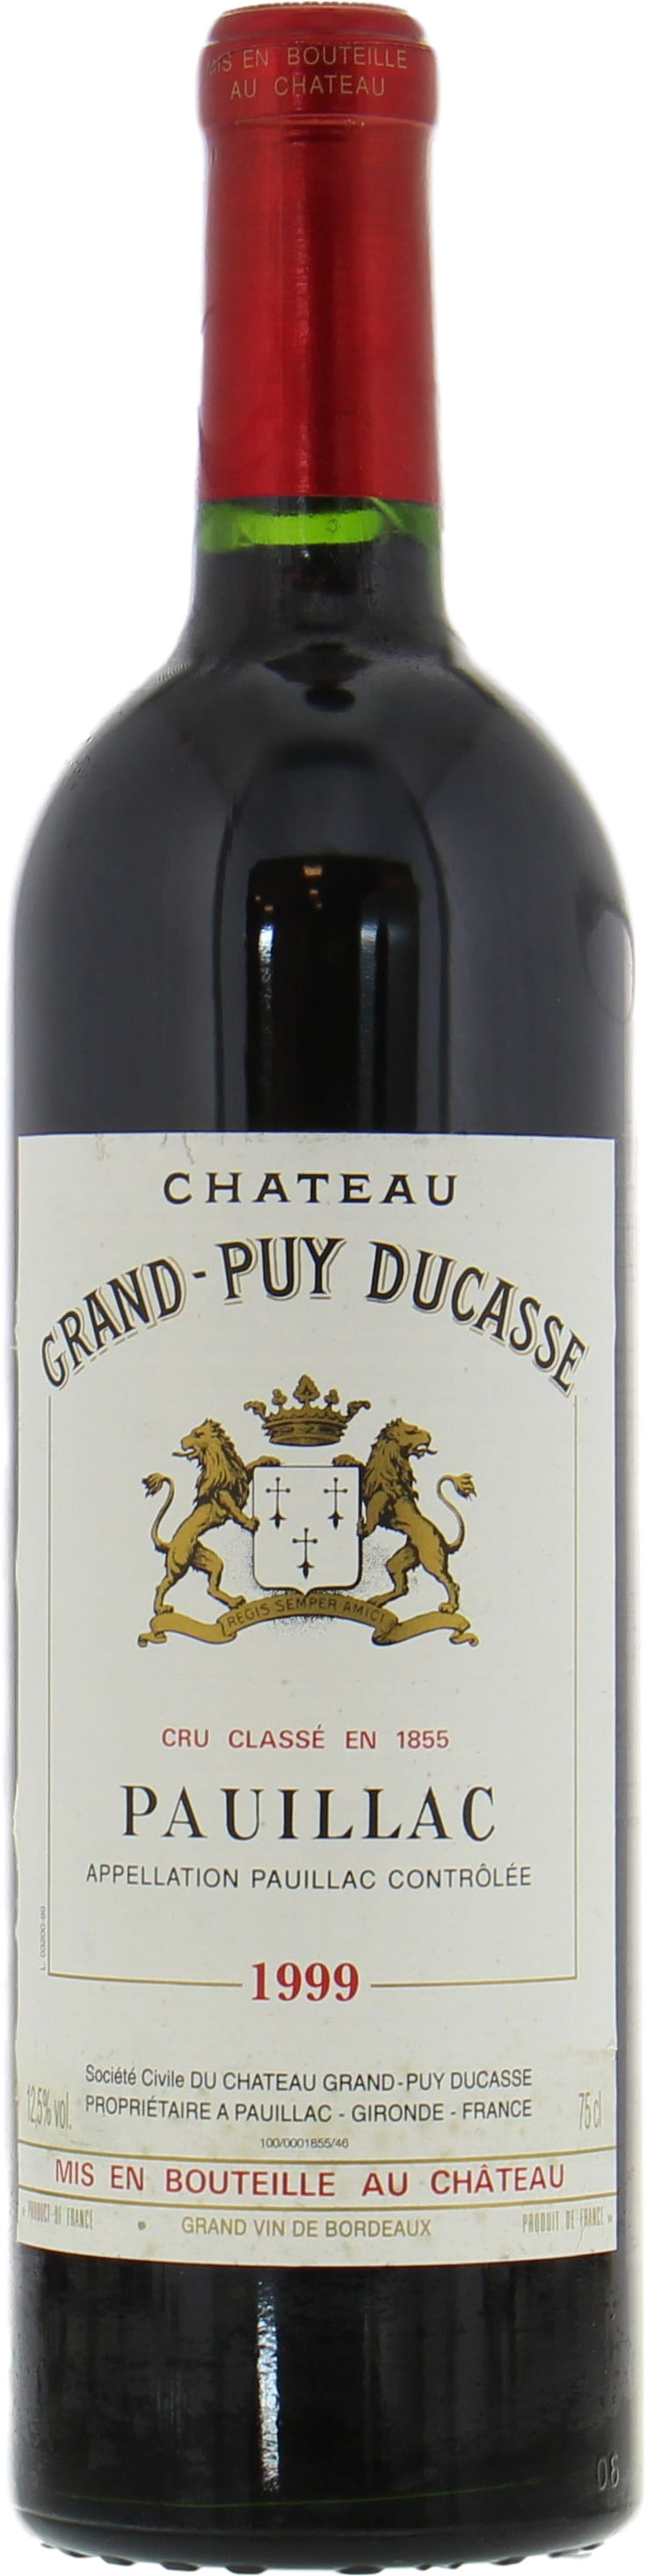 Chateau Grand Puy Ducasse - Chateau Grand Puy Ducasse 1999